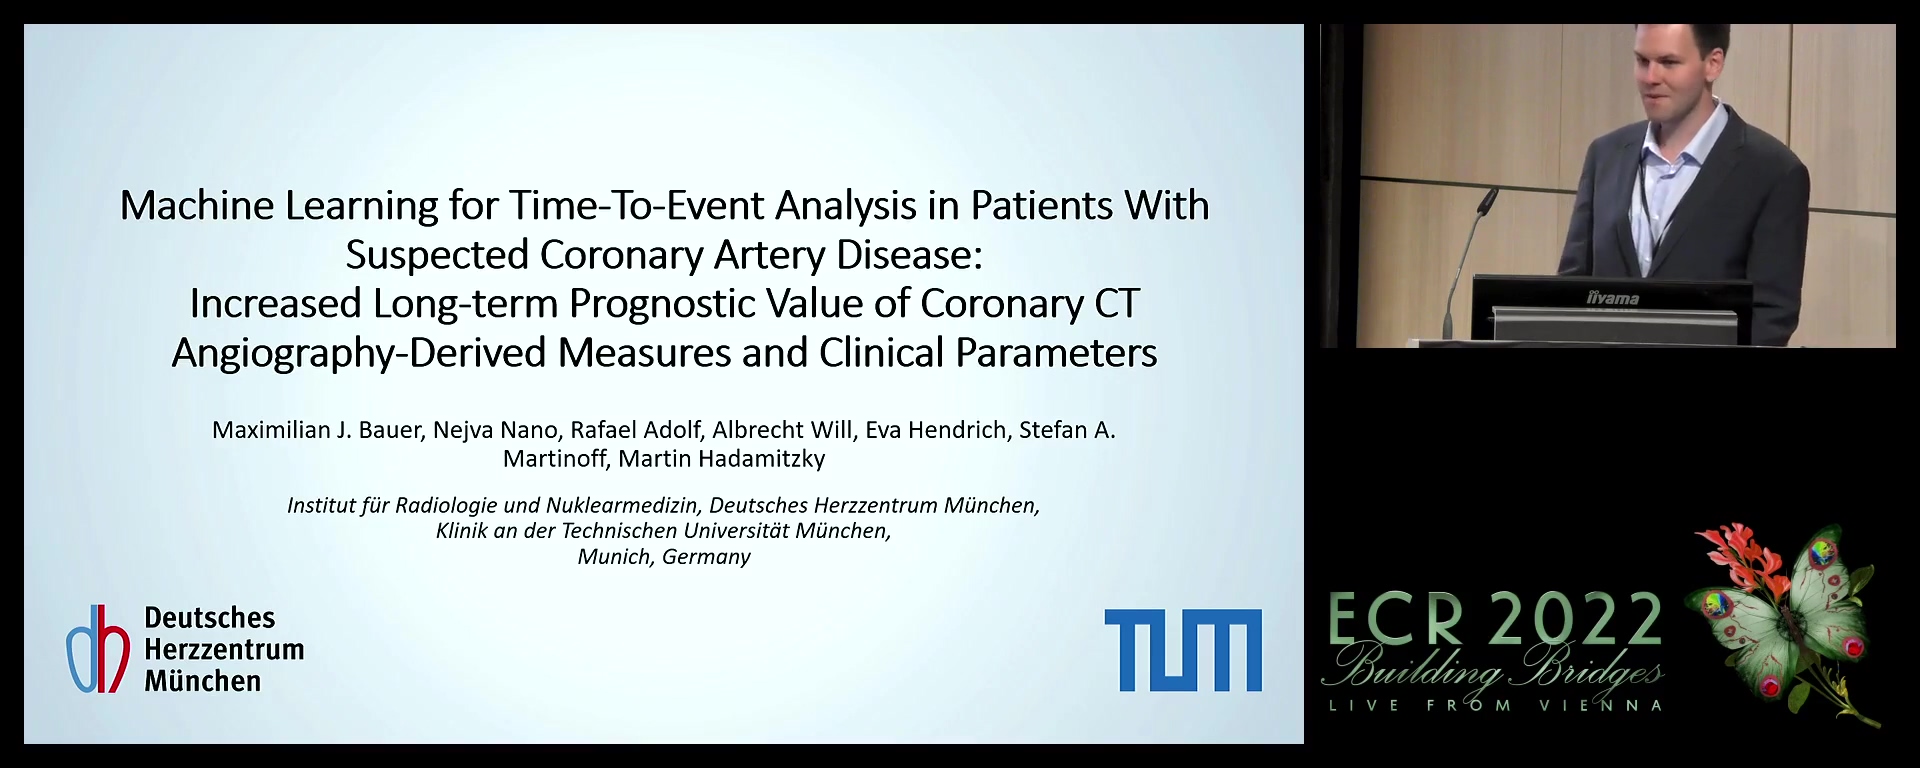 Machine learning for time-to-event analysis in patients with suspected coronary artery disease: increased long-term prognostic value of coronary CT angiography-derived measures and clinical parameters - Maximilian Josef Bauer, Munich / DE